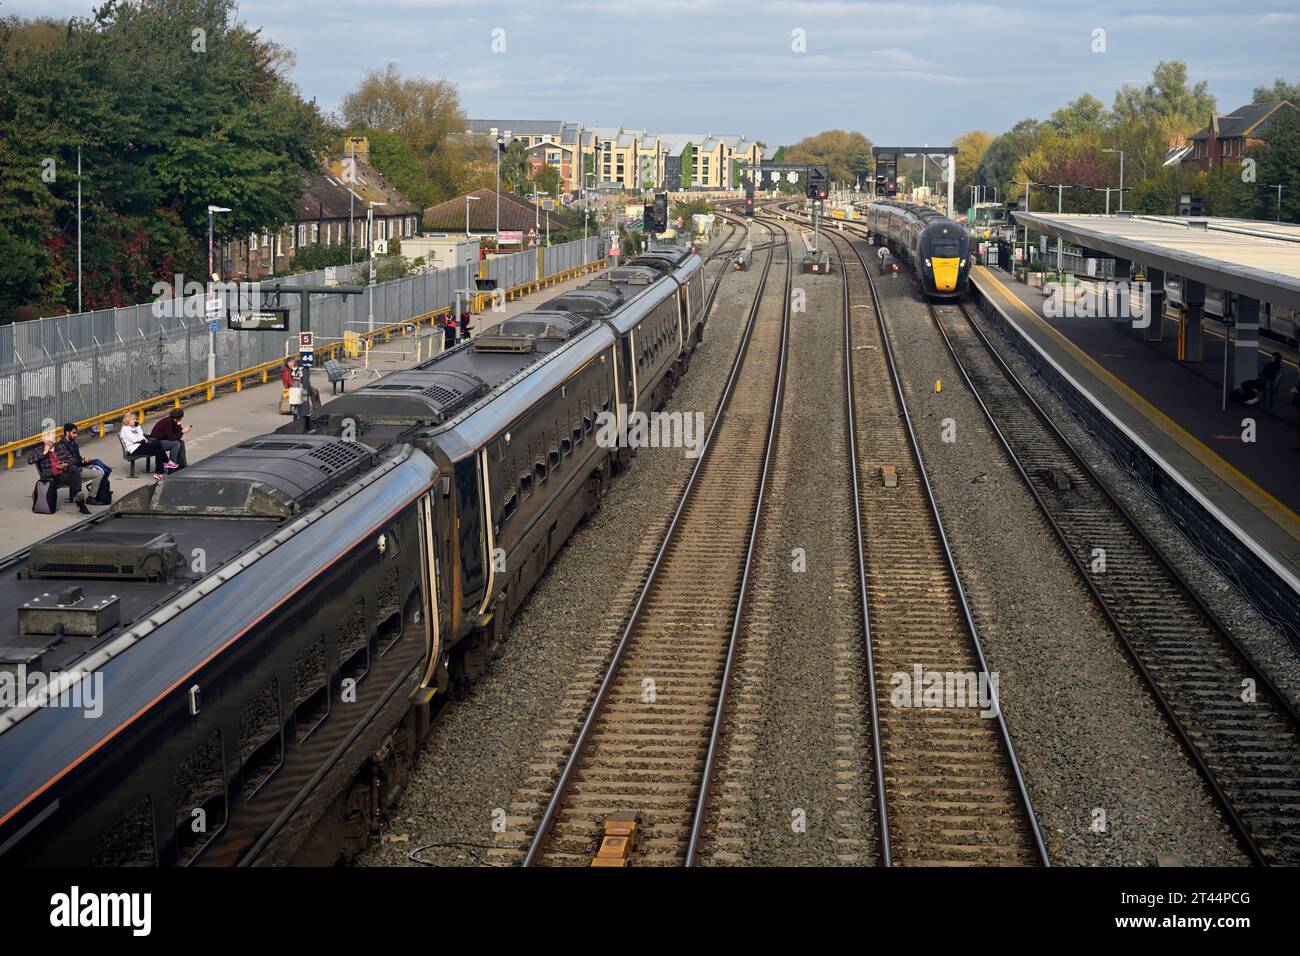 Two trains, one coming one going, at Oxford train station with tracks and platforms, UK Stock Photo